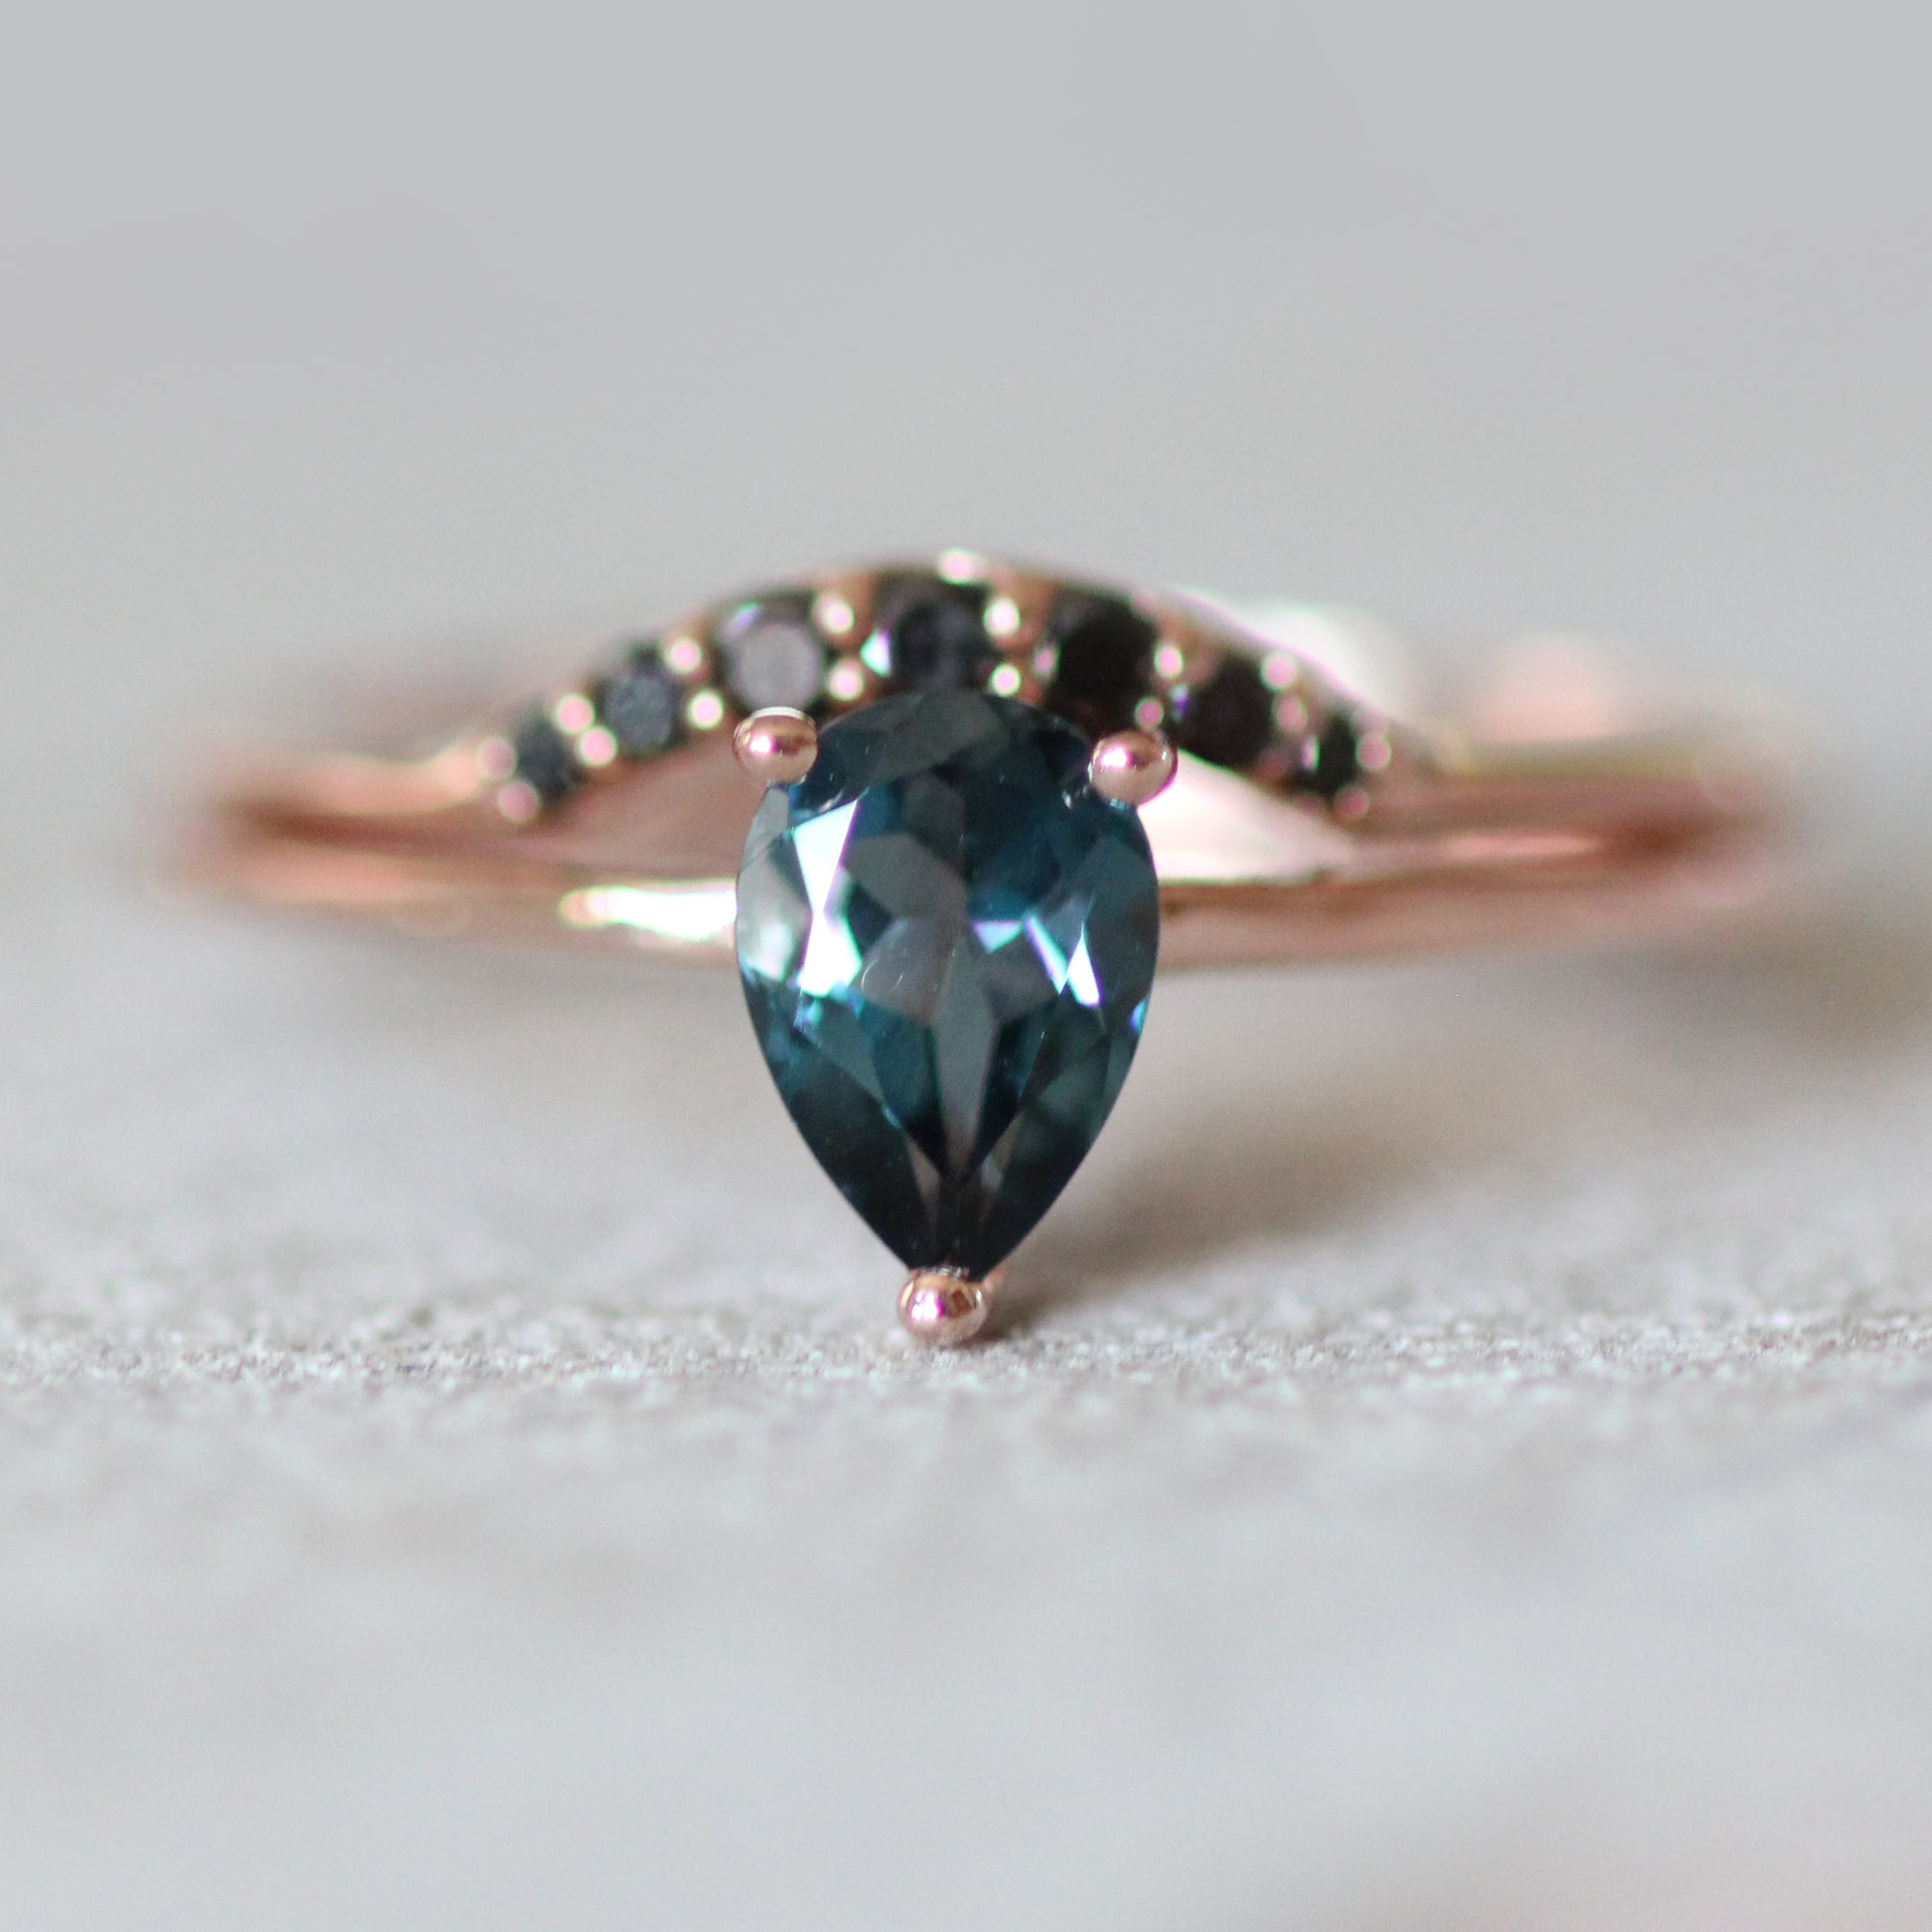 London Blue Topaz .85 carat Pear Cut - Your choice of metal - Custom - Midwinter Co. Alternative Bridal Rings and Modern Fine Jewelry